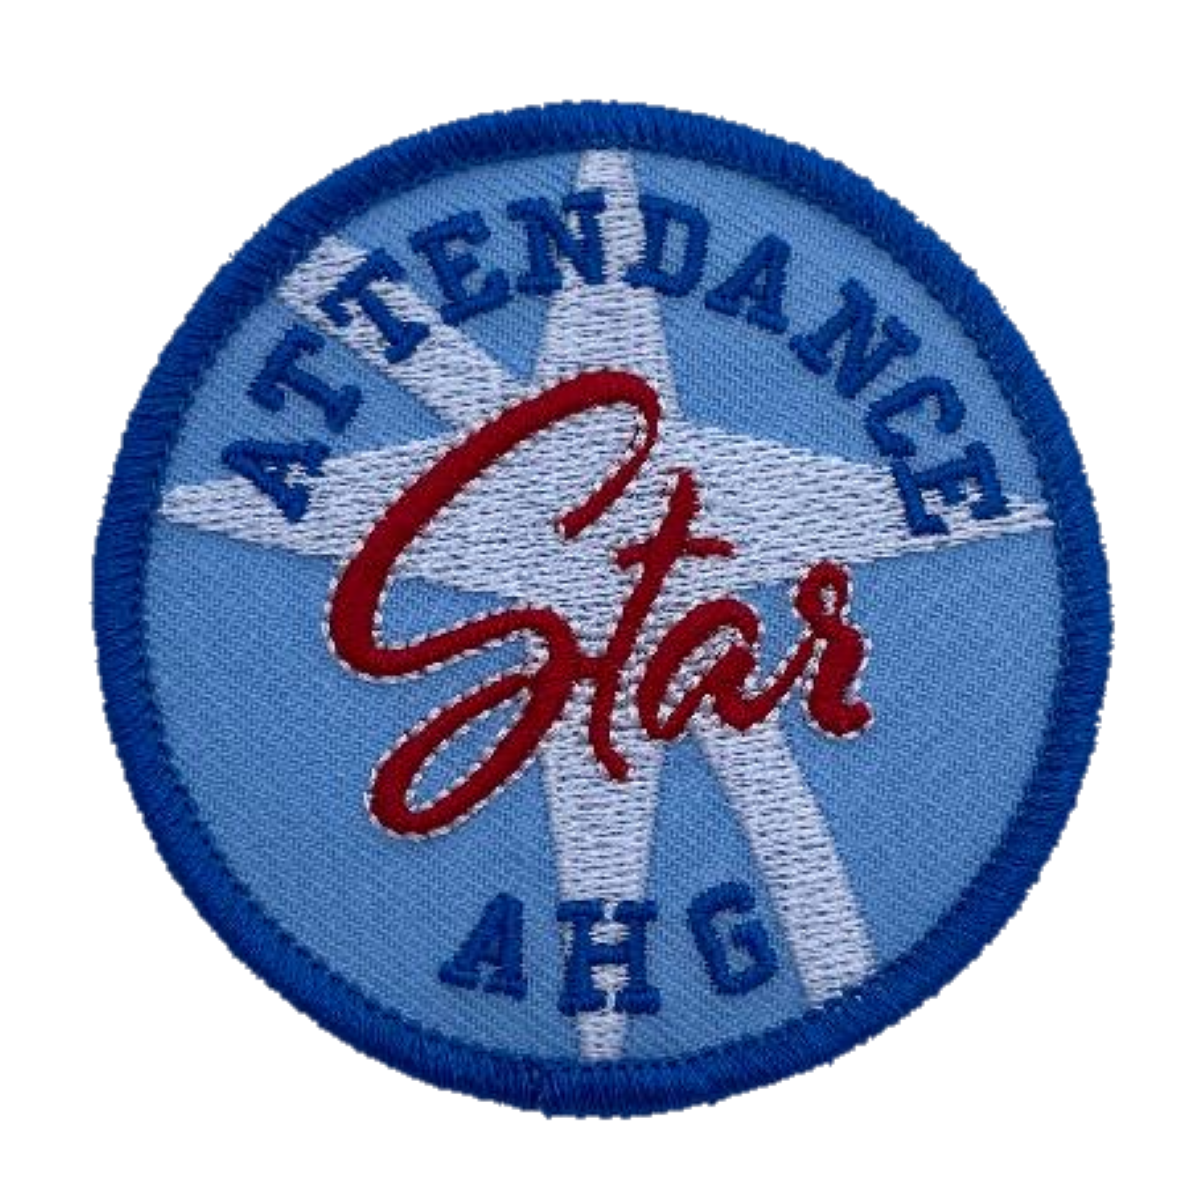 AHG - Christmas Party Patch